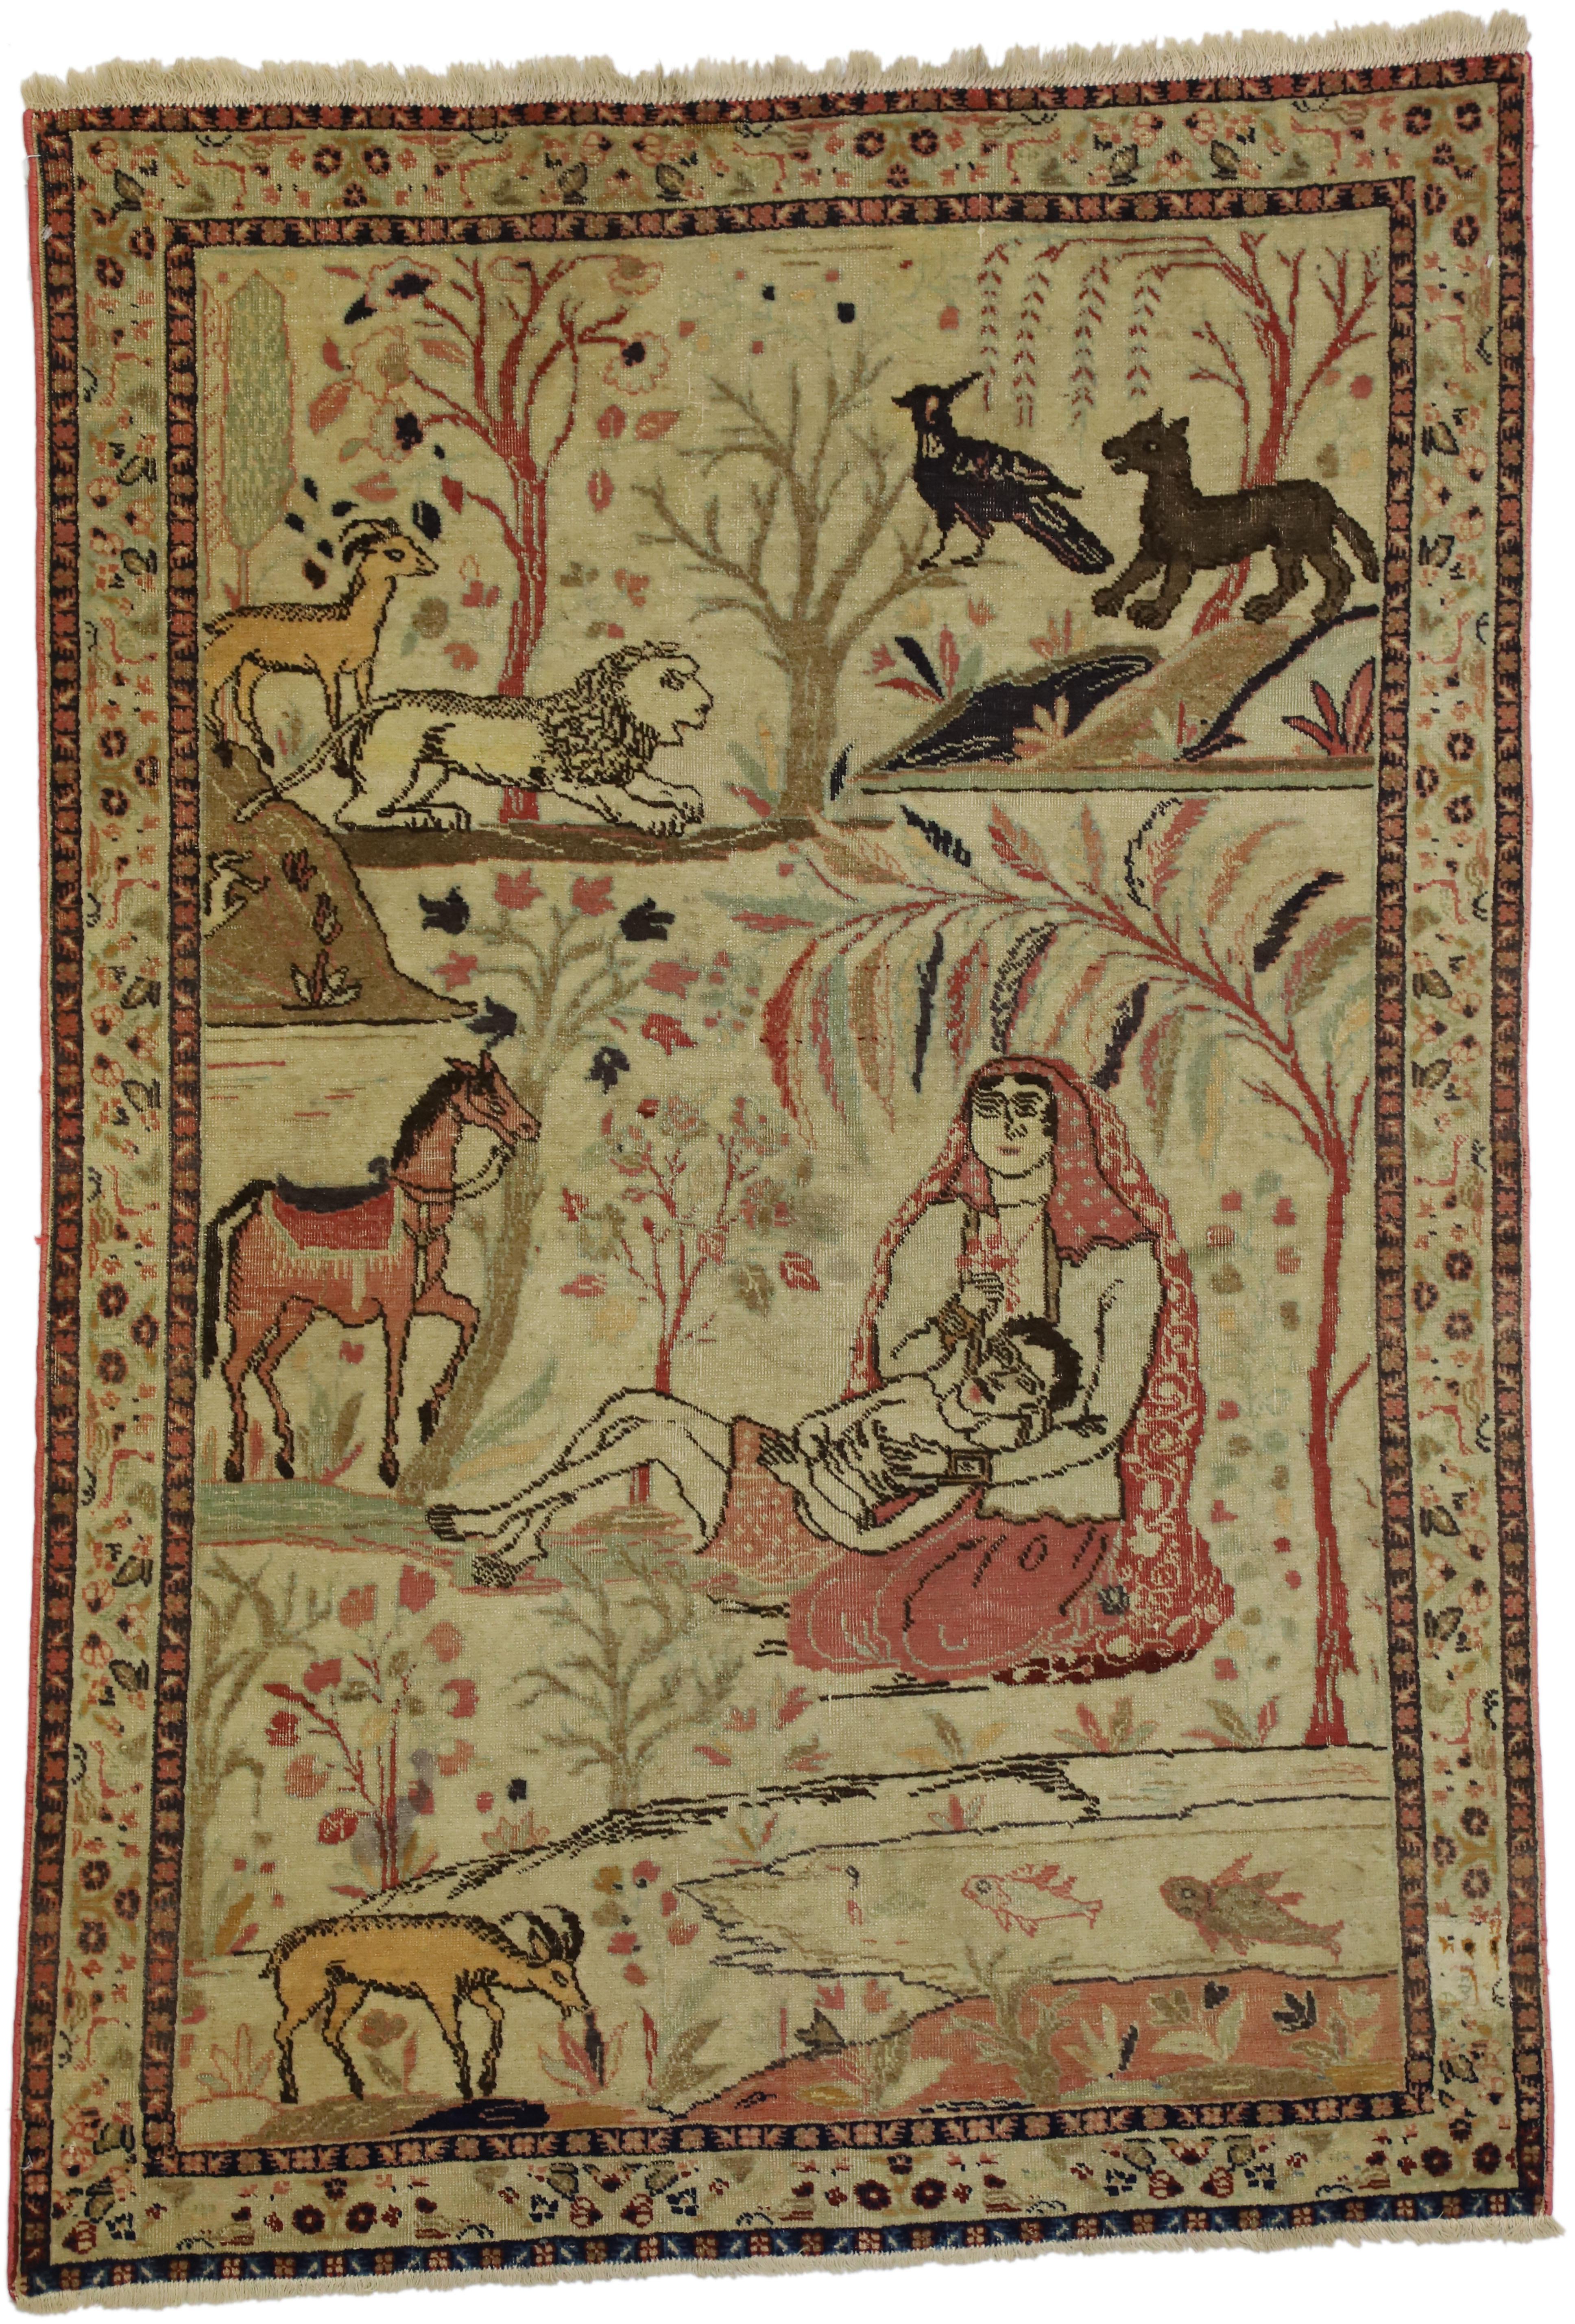 20th Century Antique Tabriz Persian Pictorial Rug, Persian Wall Hanging, Landscape Tapestry